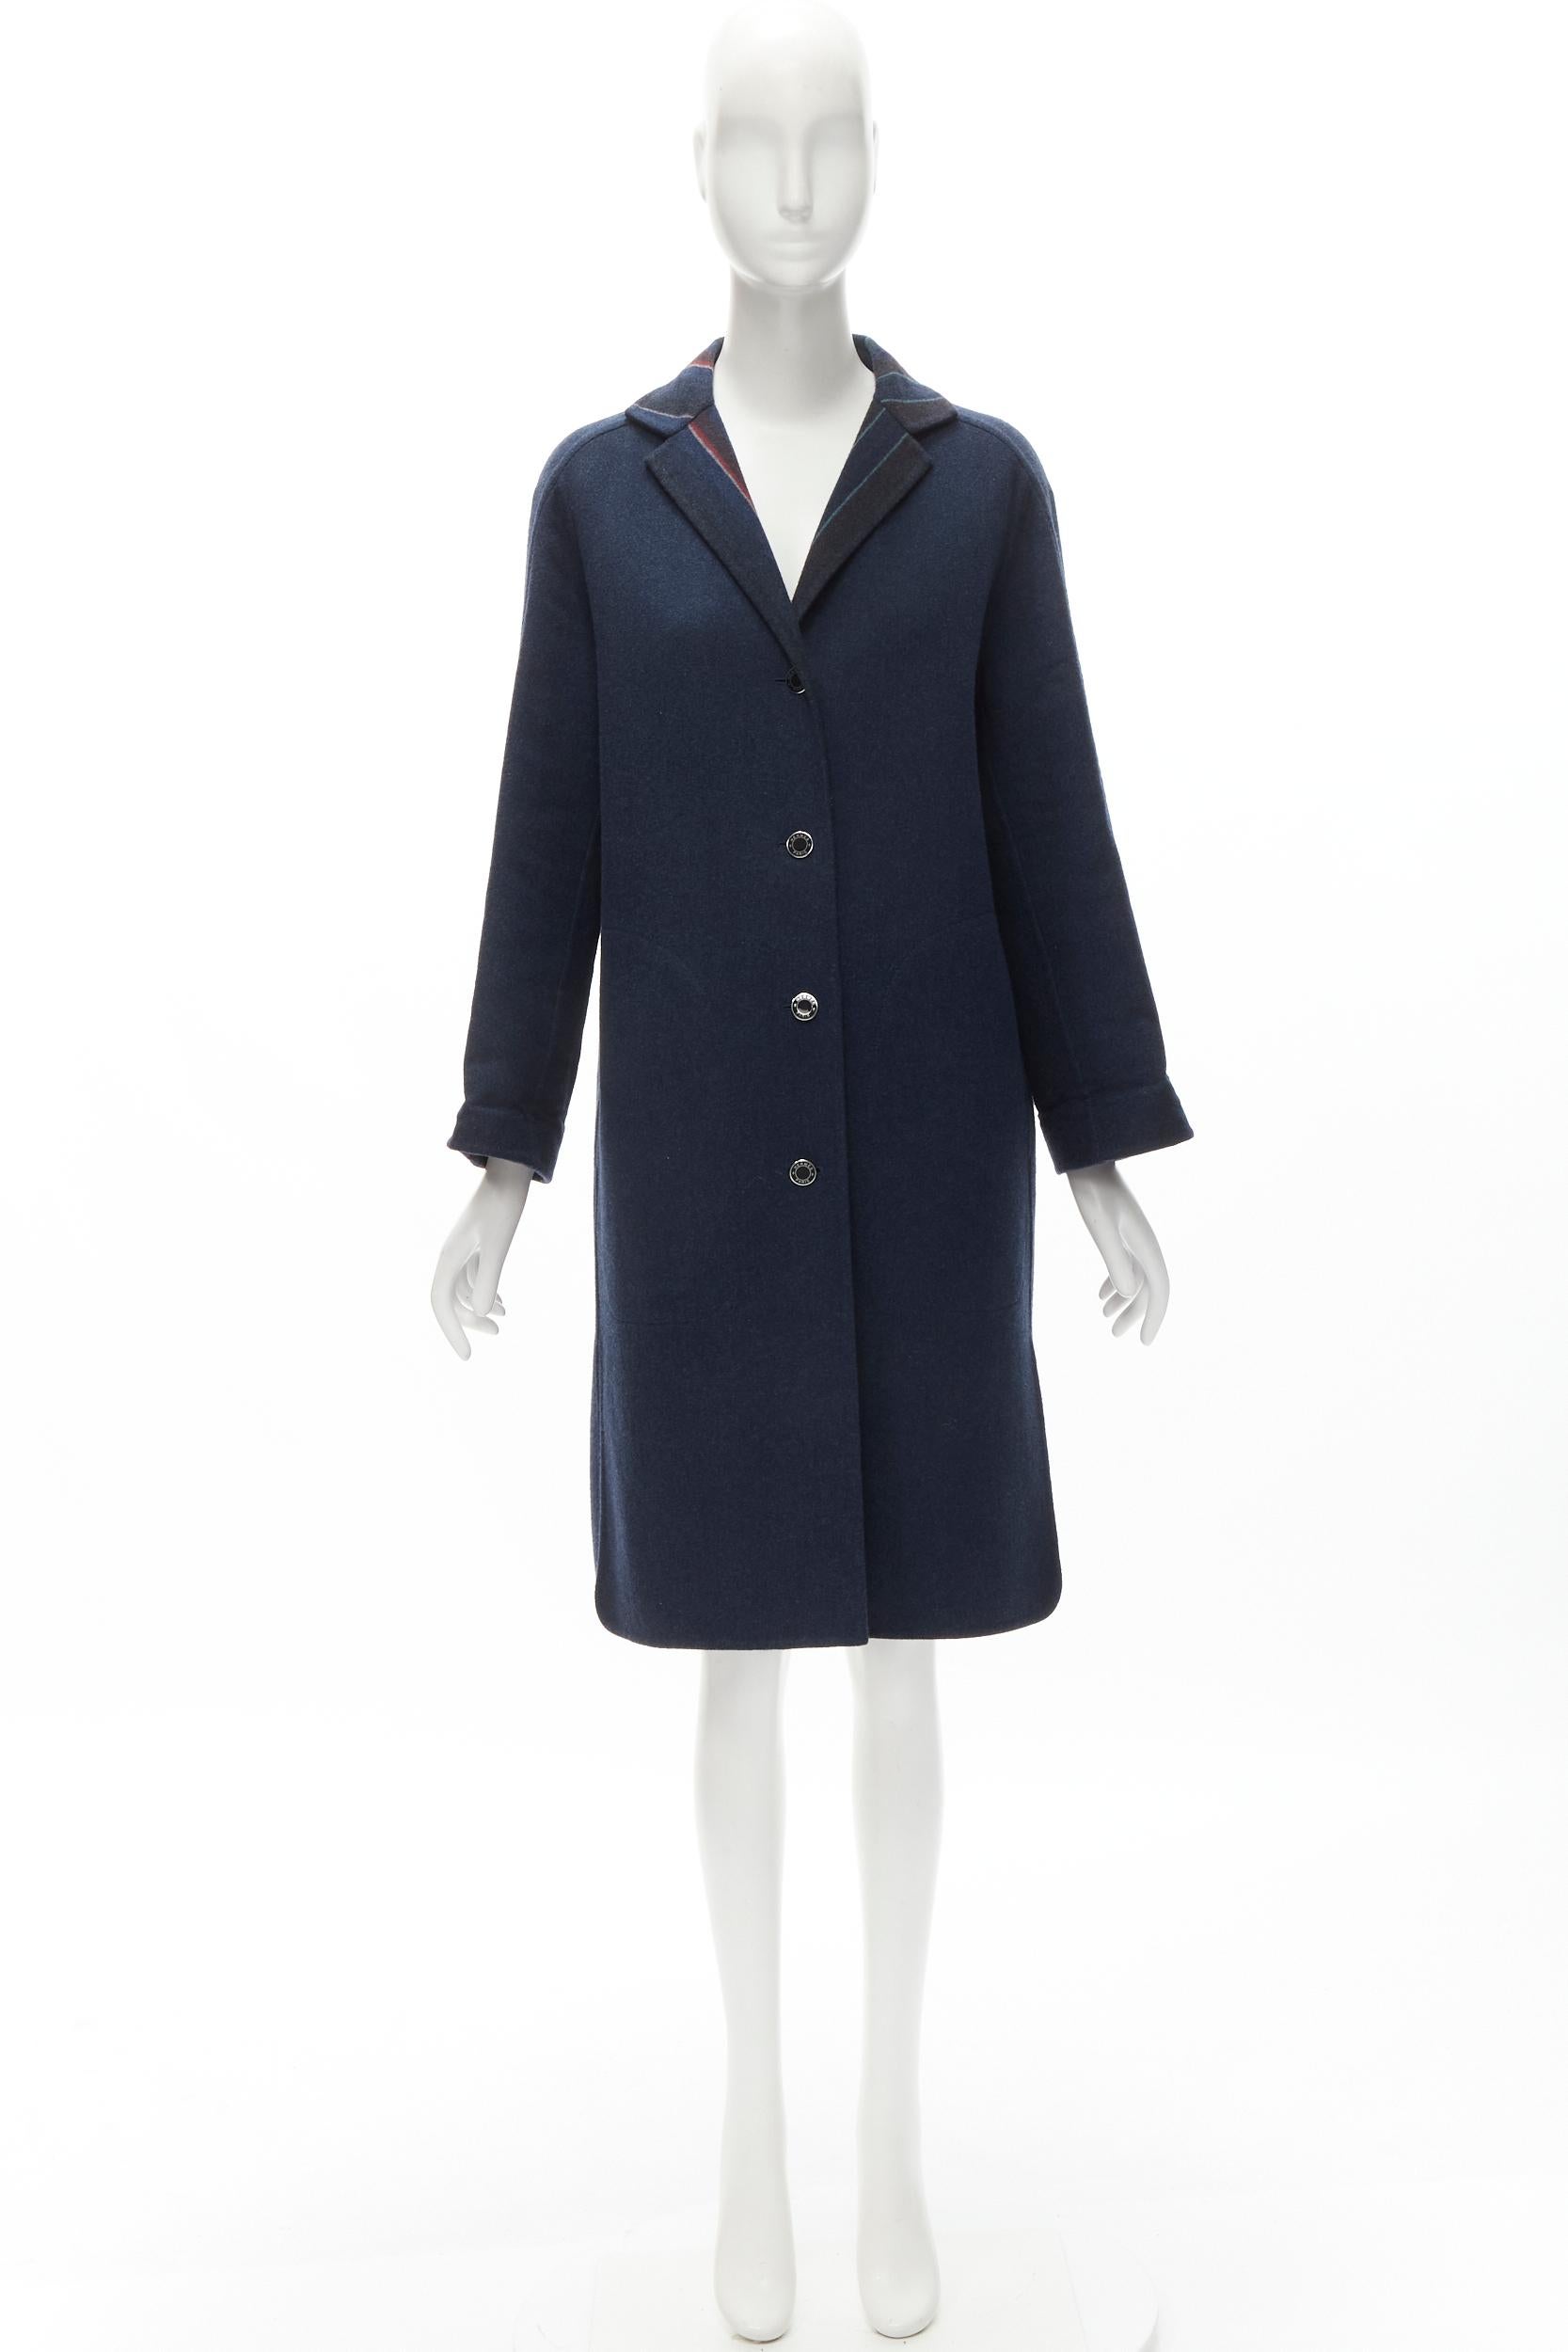 HERMES navy double faced virgin wool cashmere stripe lining maxi coat FR34 XS 7